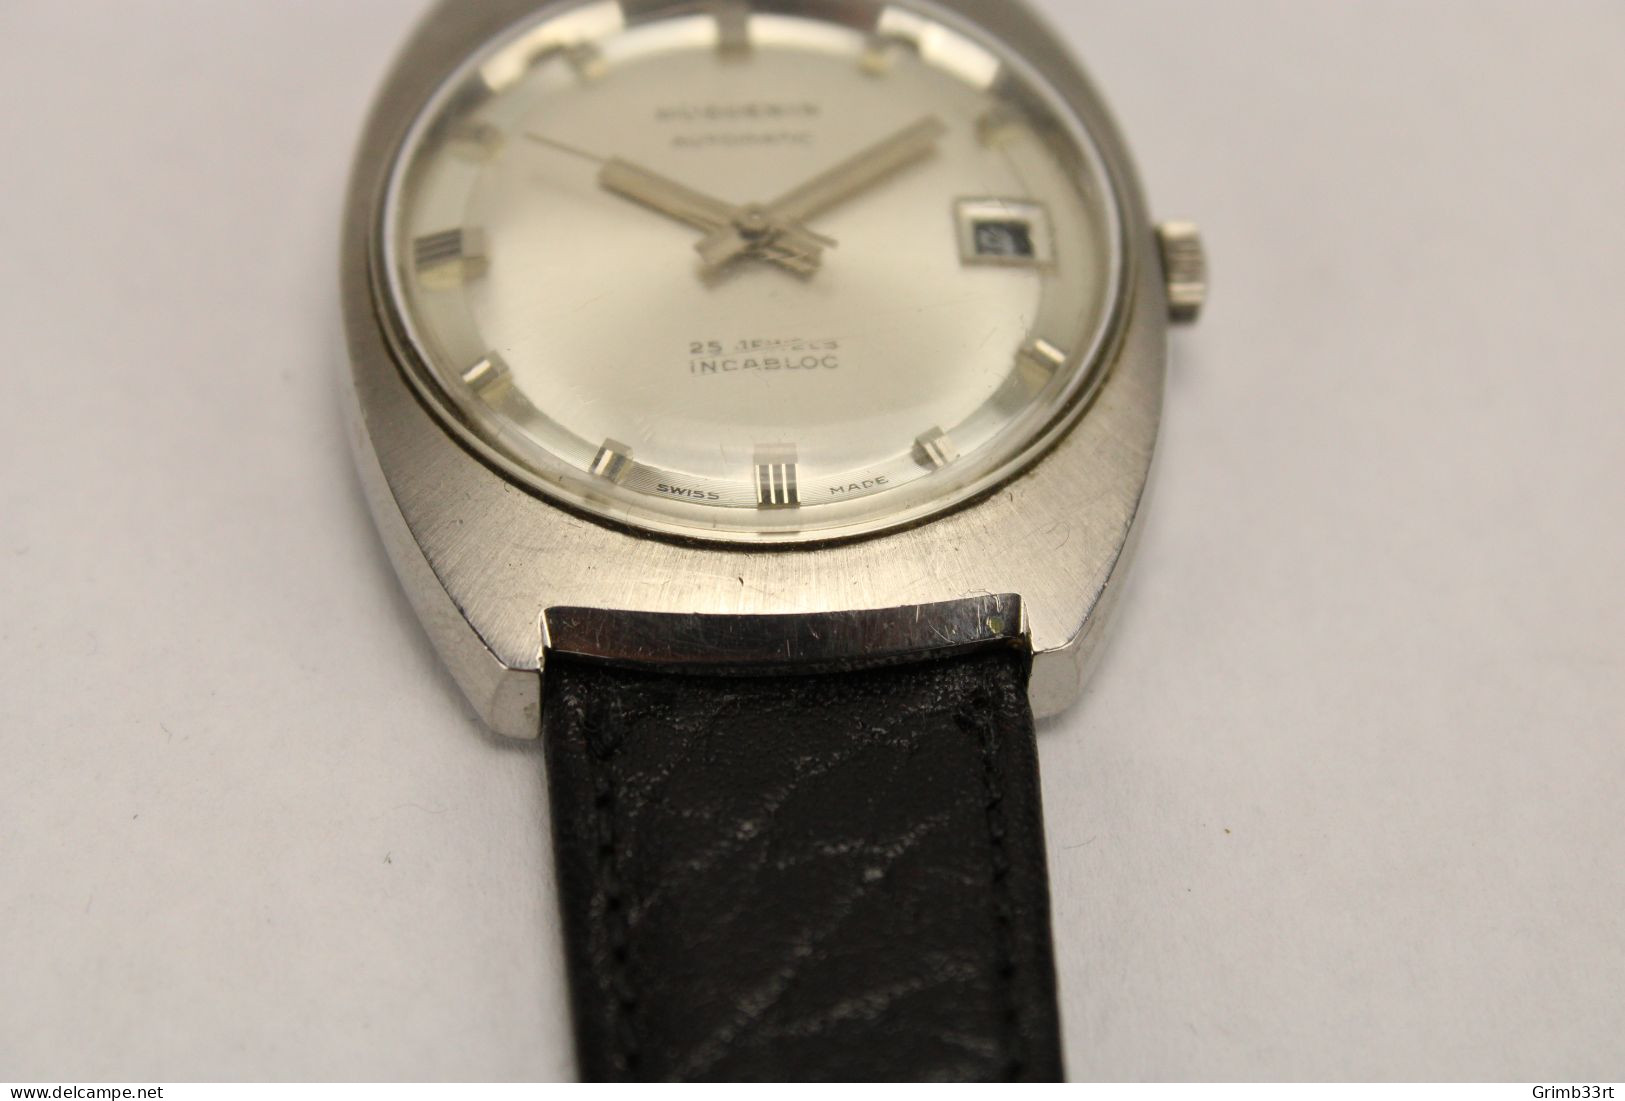 Huguenin - Automatic men's watch - with day indicator - 1970's